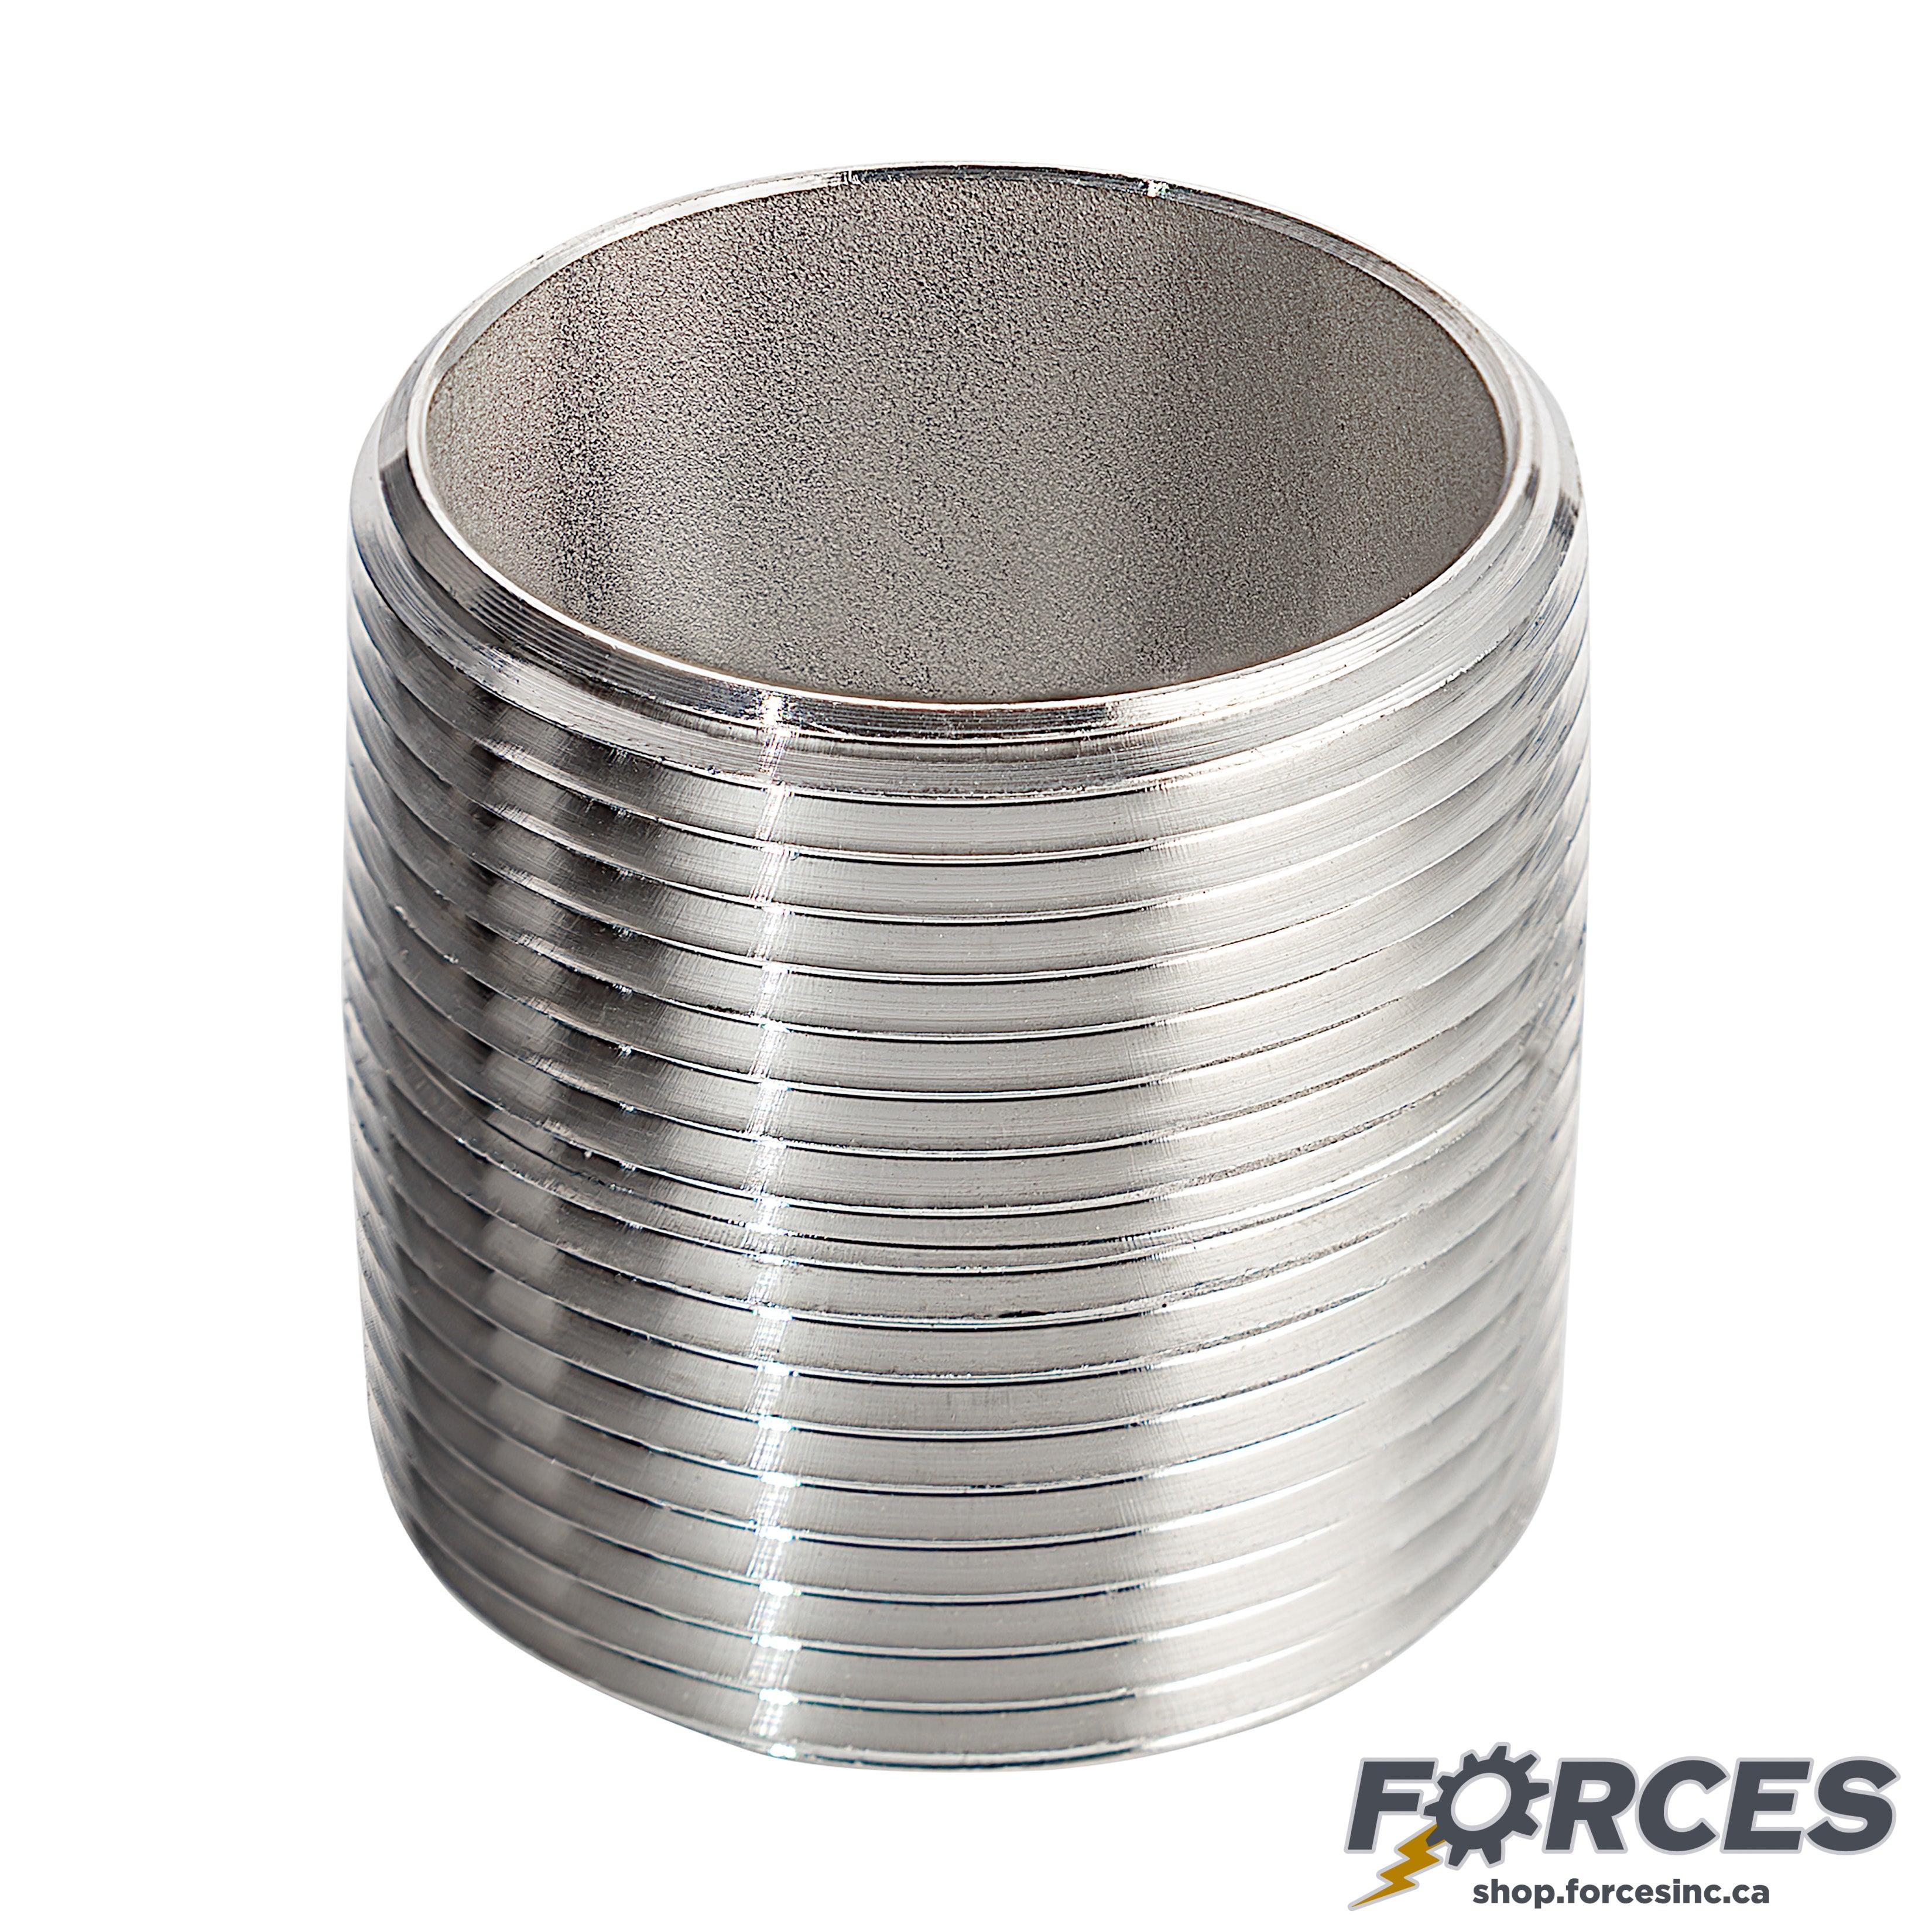 3" Closed Nipple - Stainless Steel 316 - Forces Inc